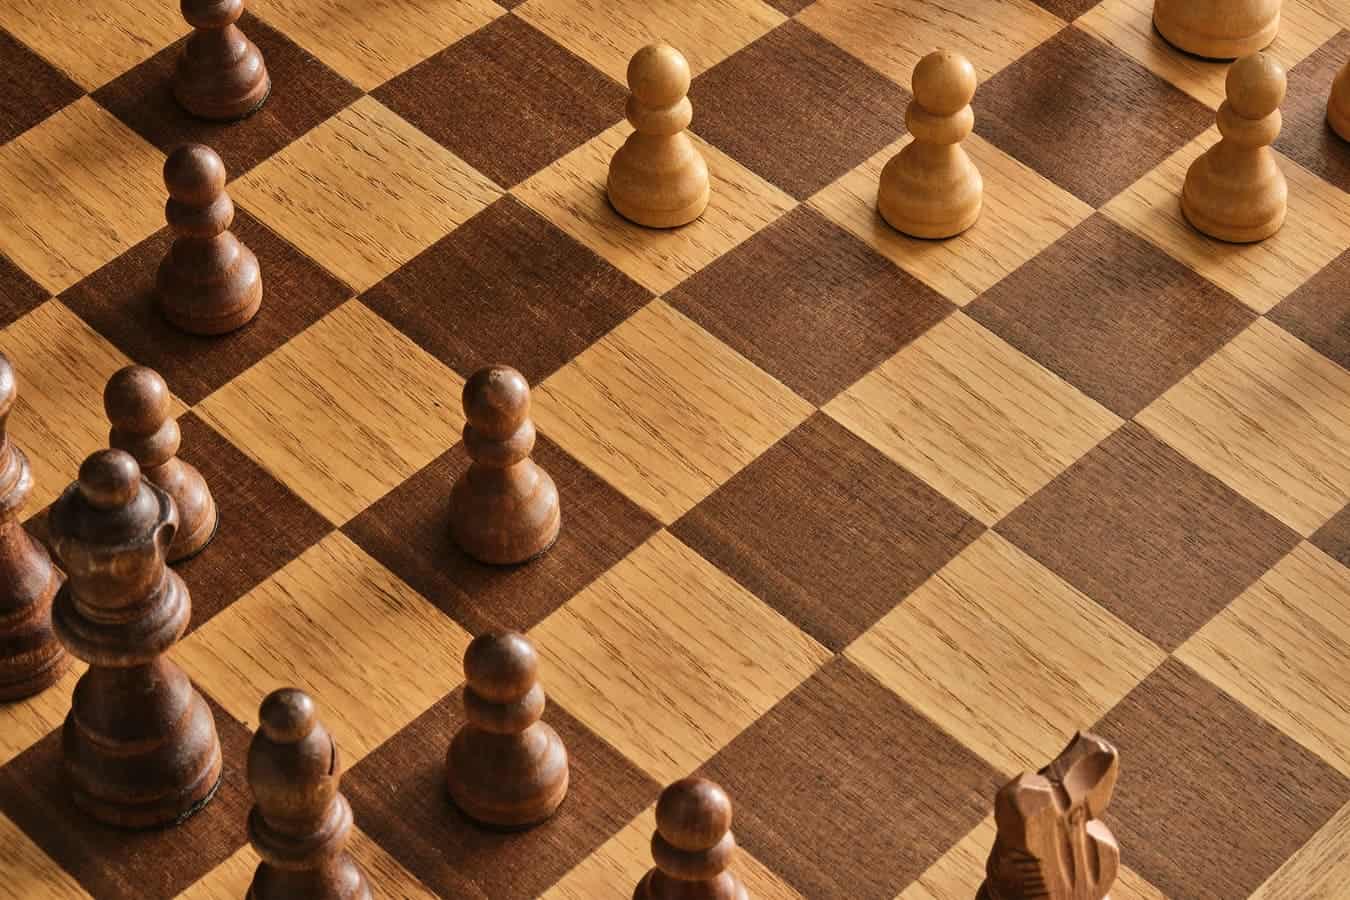 Who is the best chess player in history? It depends how you look at it